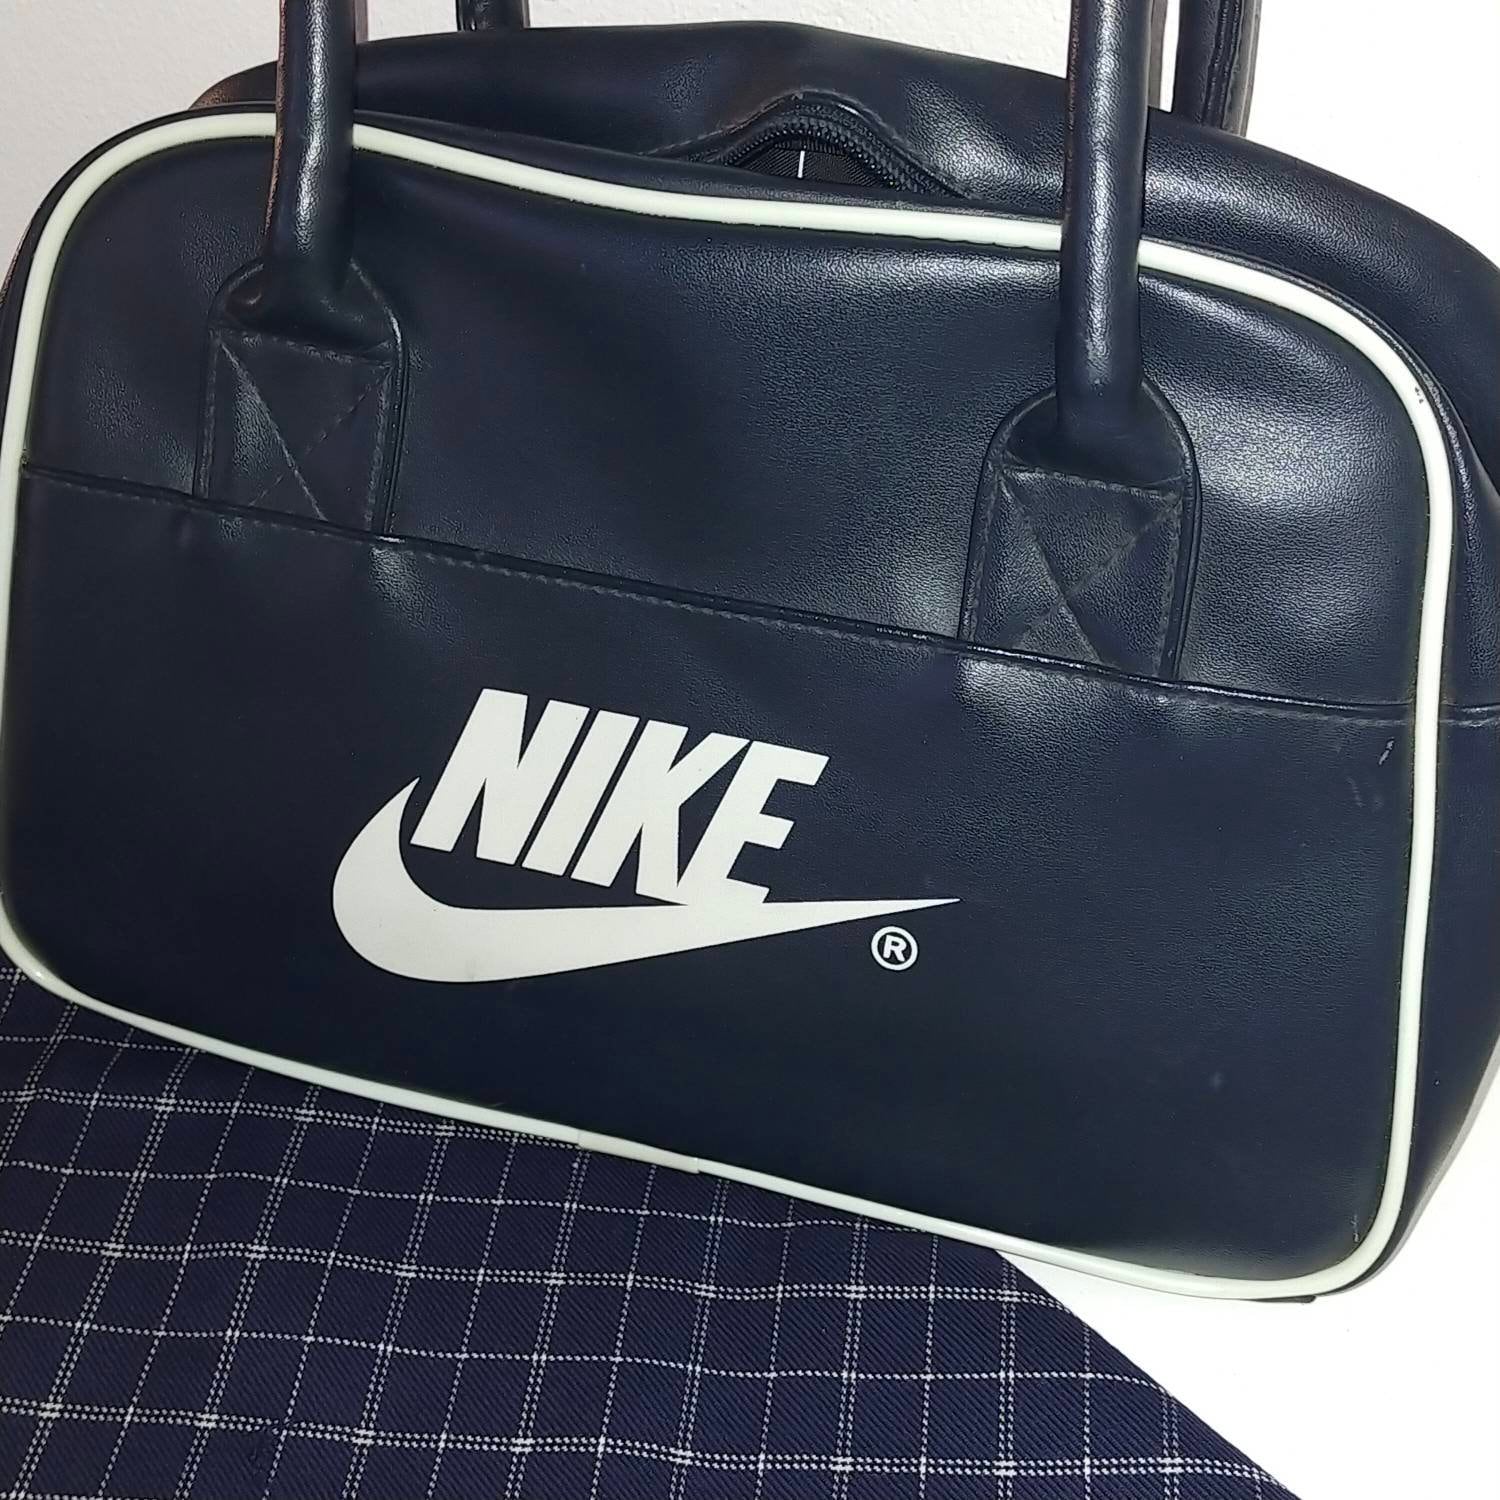 Vintage Blue NIKE Bag in Leather With Handles Rare Item Etsy